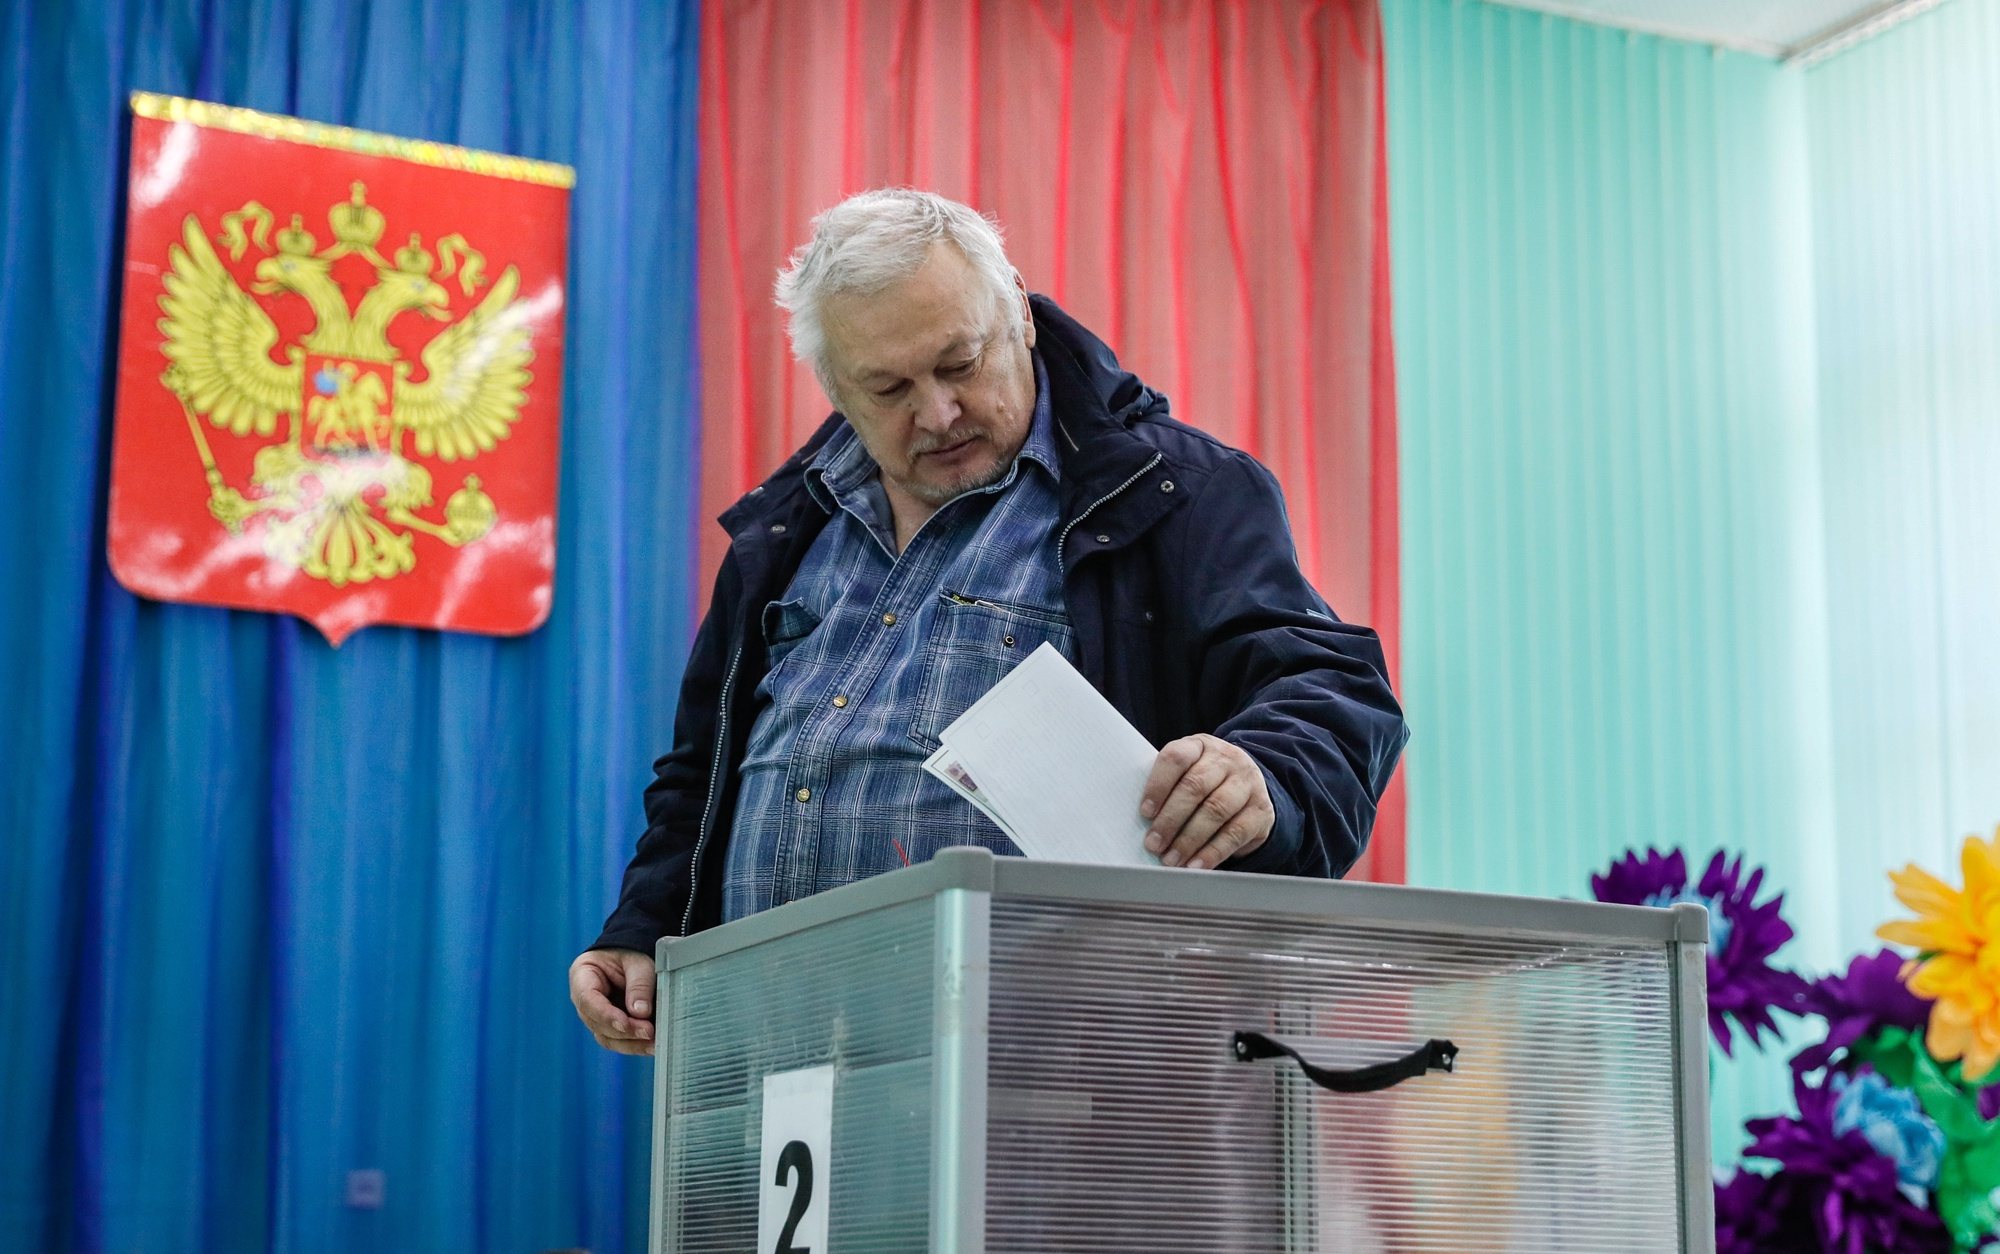 epa11225716 A Russian man casts his ballot during the presidential elections at a polling station in Baikonur, Kazakhstan, 17 March 2024. The Federation Council has scheduled presidential elections for 17 March 2024. Voting will last three days: March 15, 16 and 17. Four candidates registered by the Central Election Commission of the Russian Federation are vying for the post of head of state: Leonid Slutsky, Nikolai Kharitonov, Vladislav Davankov and Vladimir Putin. Baikonur is the location of the Russian leased Baikonur cosmodrome.  EPA/YURI KOCHETKOV